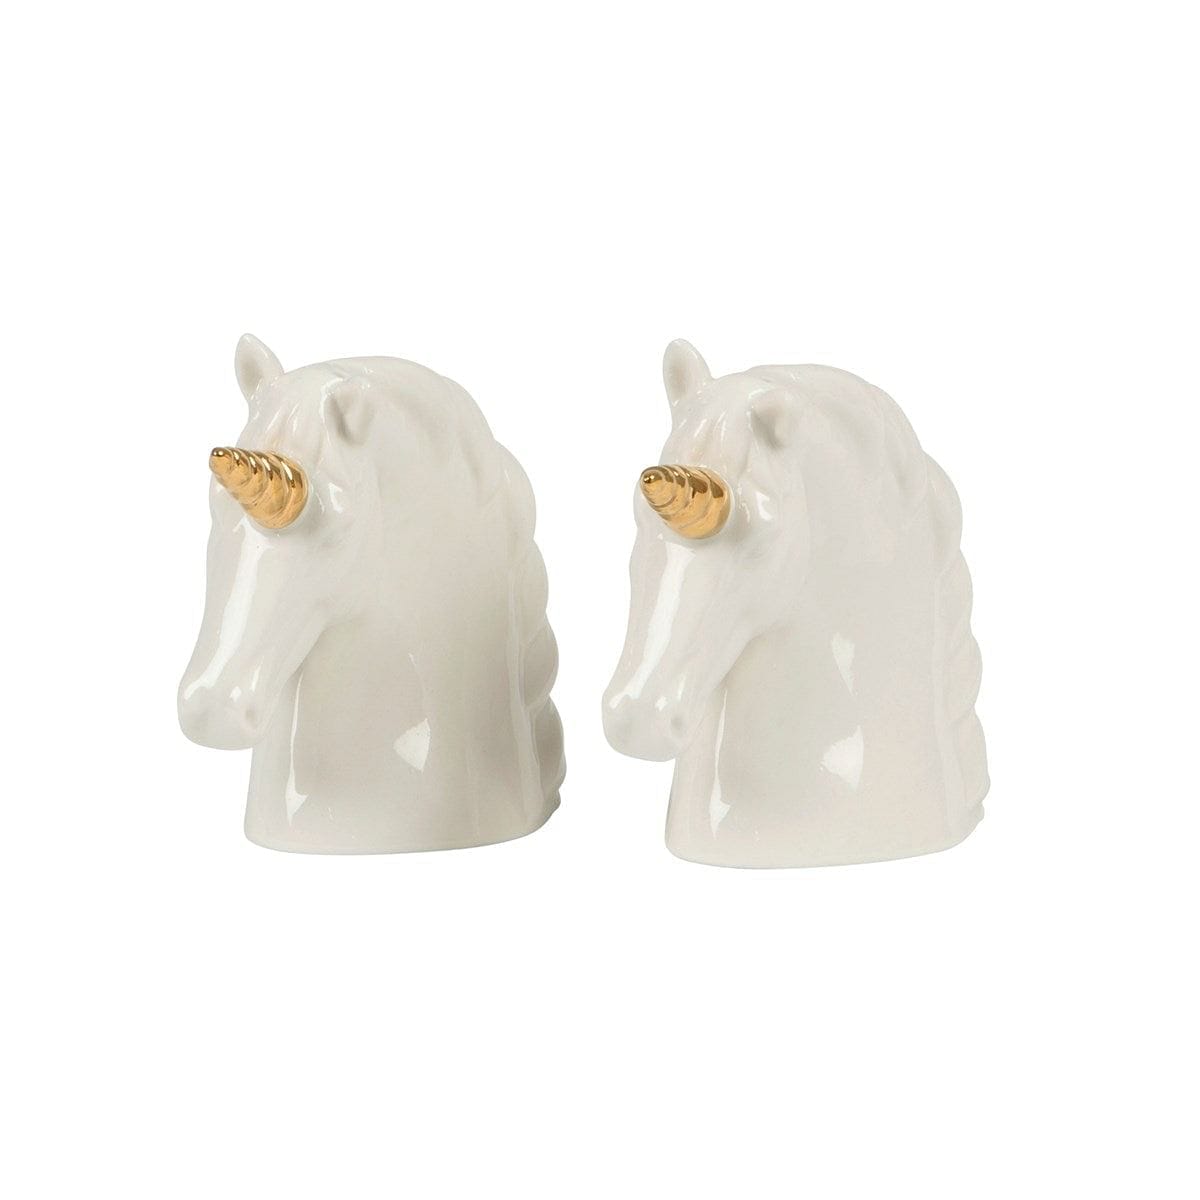 Unicorn Salt and Pepper Shakers - Shelburne Country Store